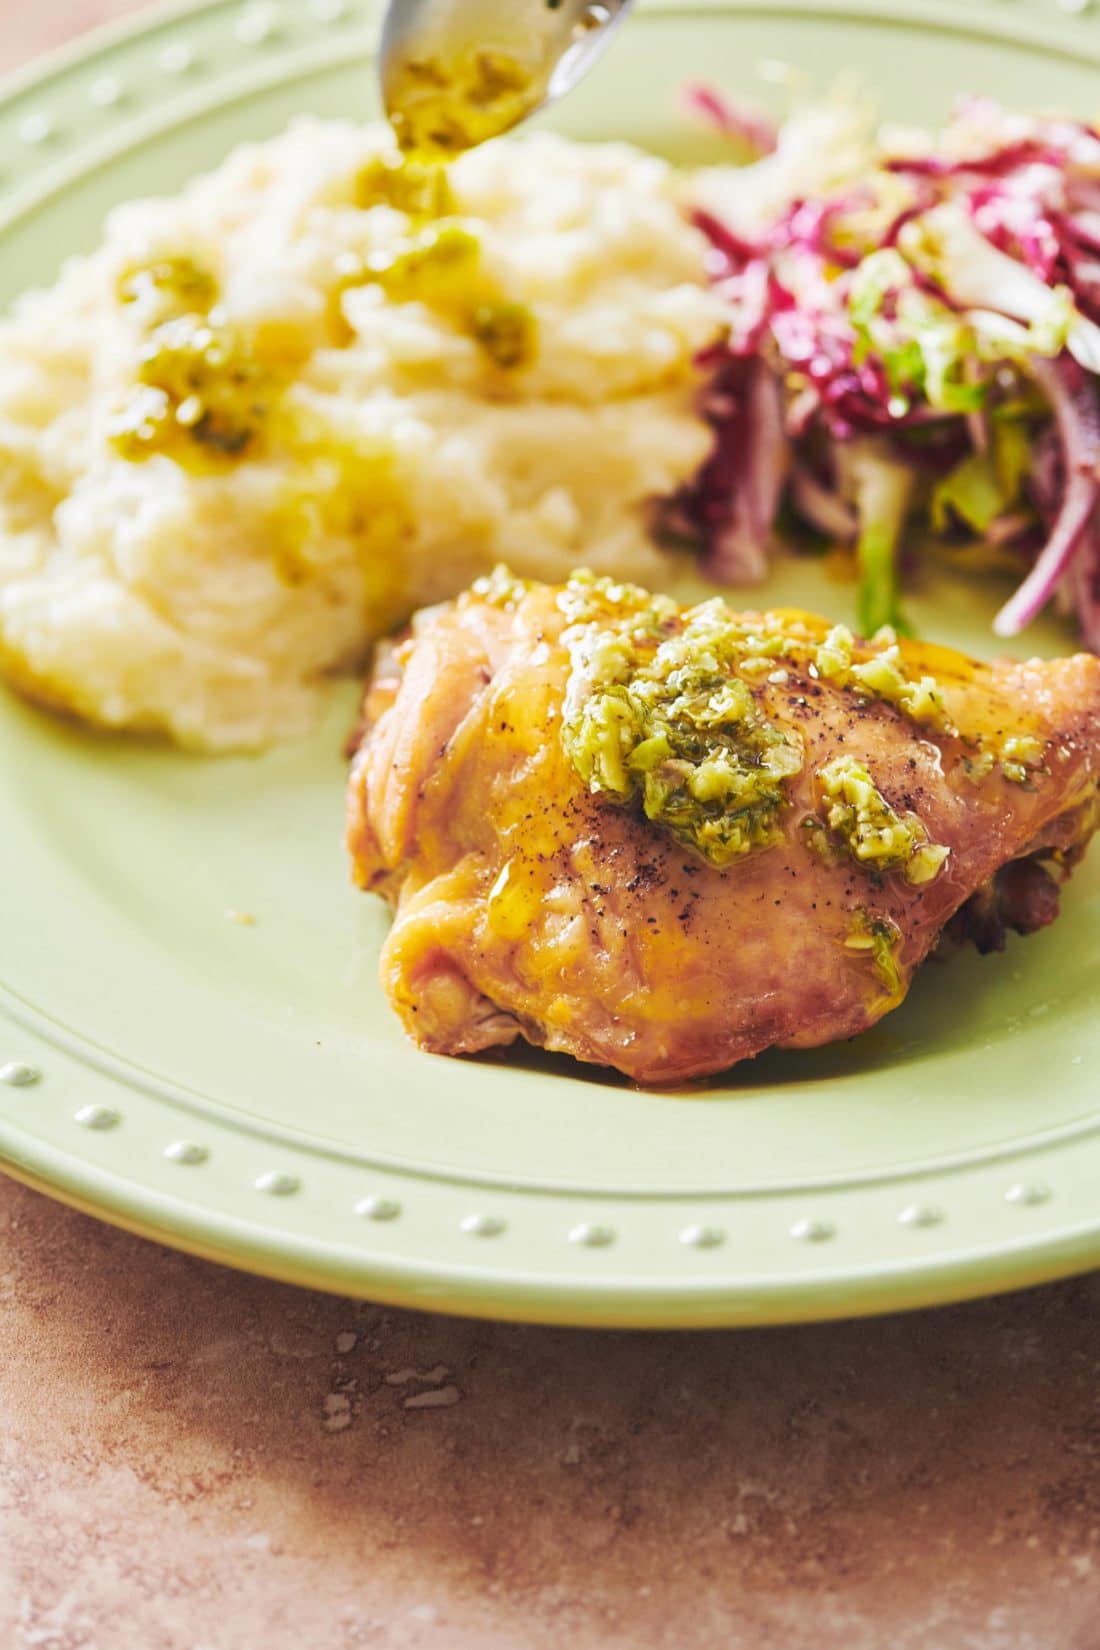 Roasted Chicken Thigh with green olive tapenade on plate.